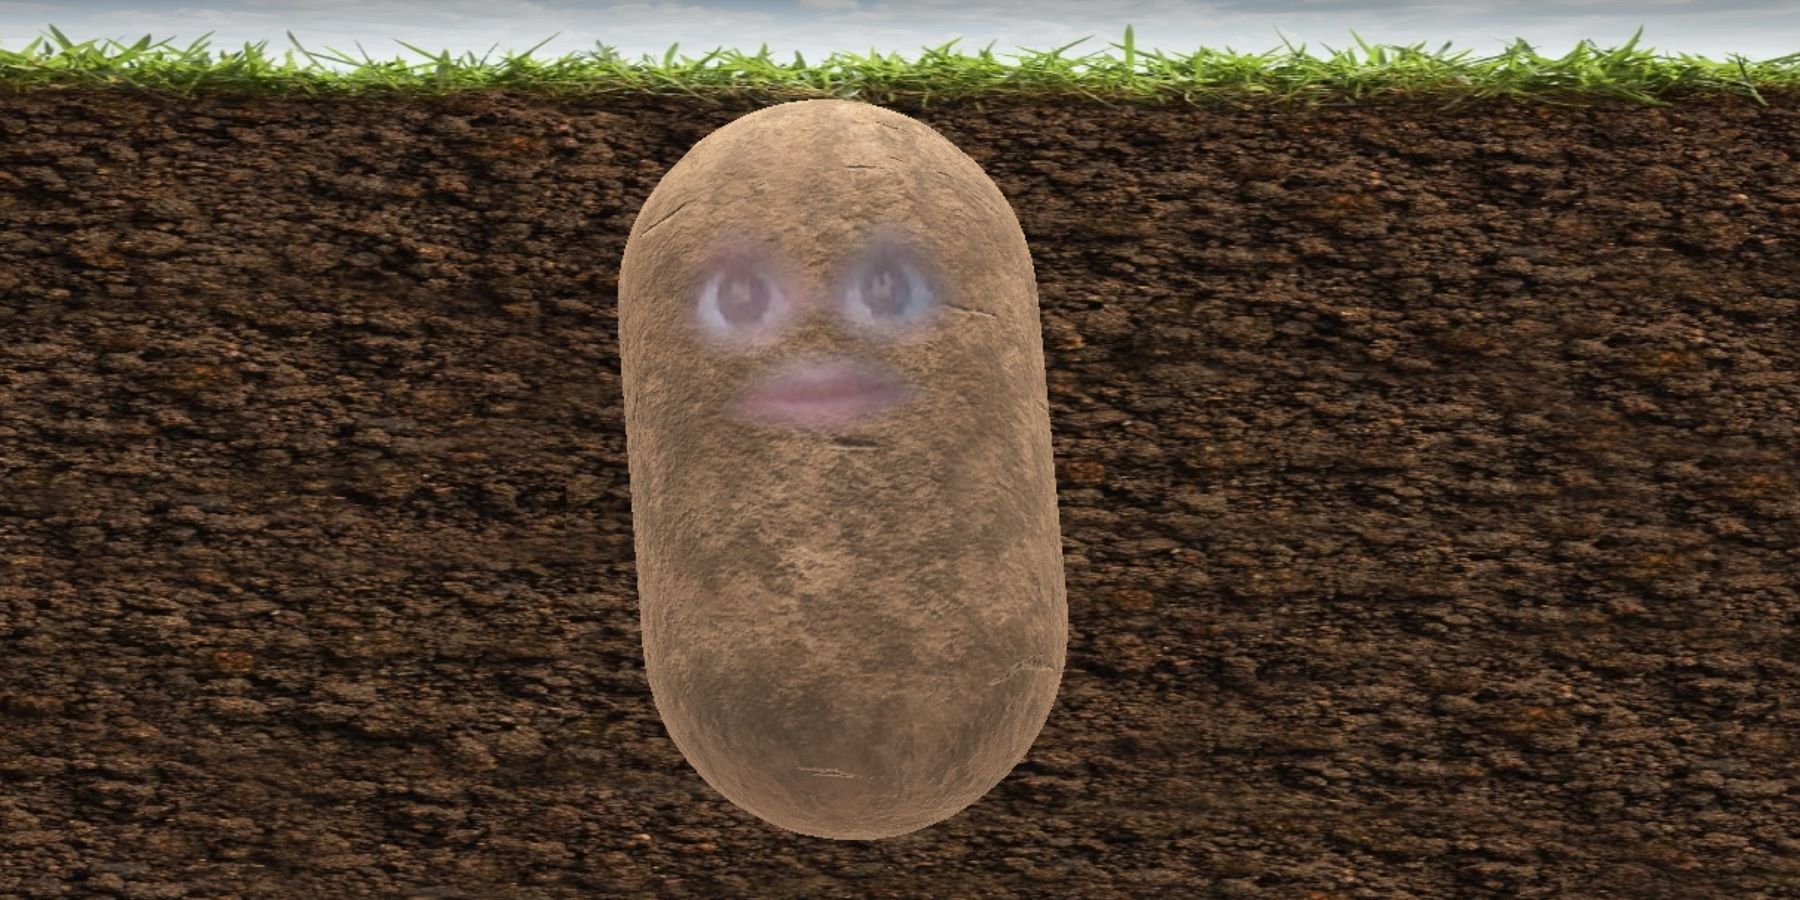 How To Turn Yourself Into A Potato With Snapchat’s Snap Camera